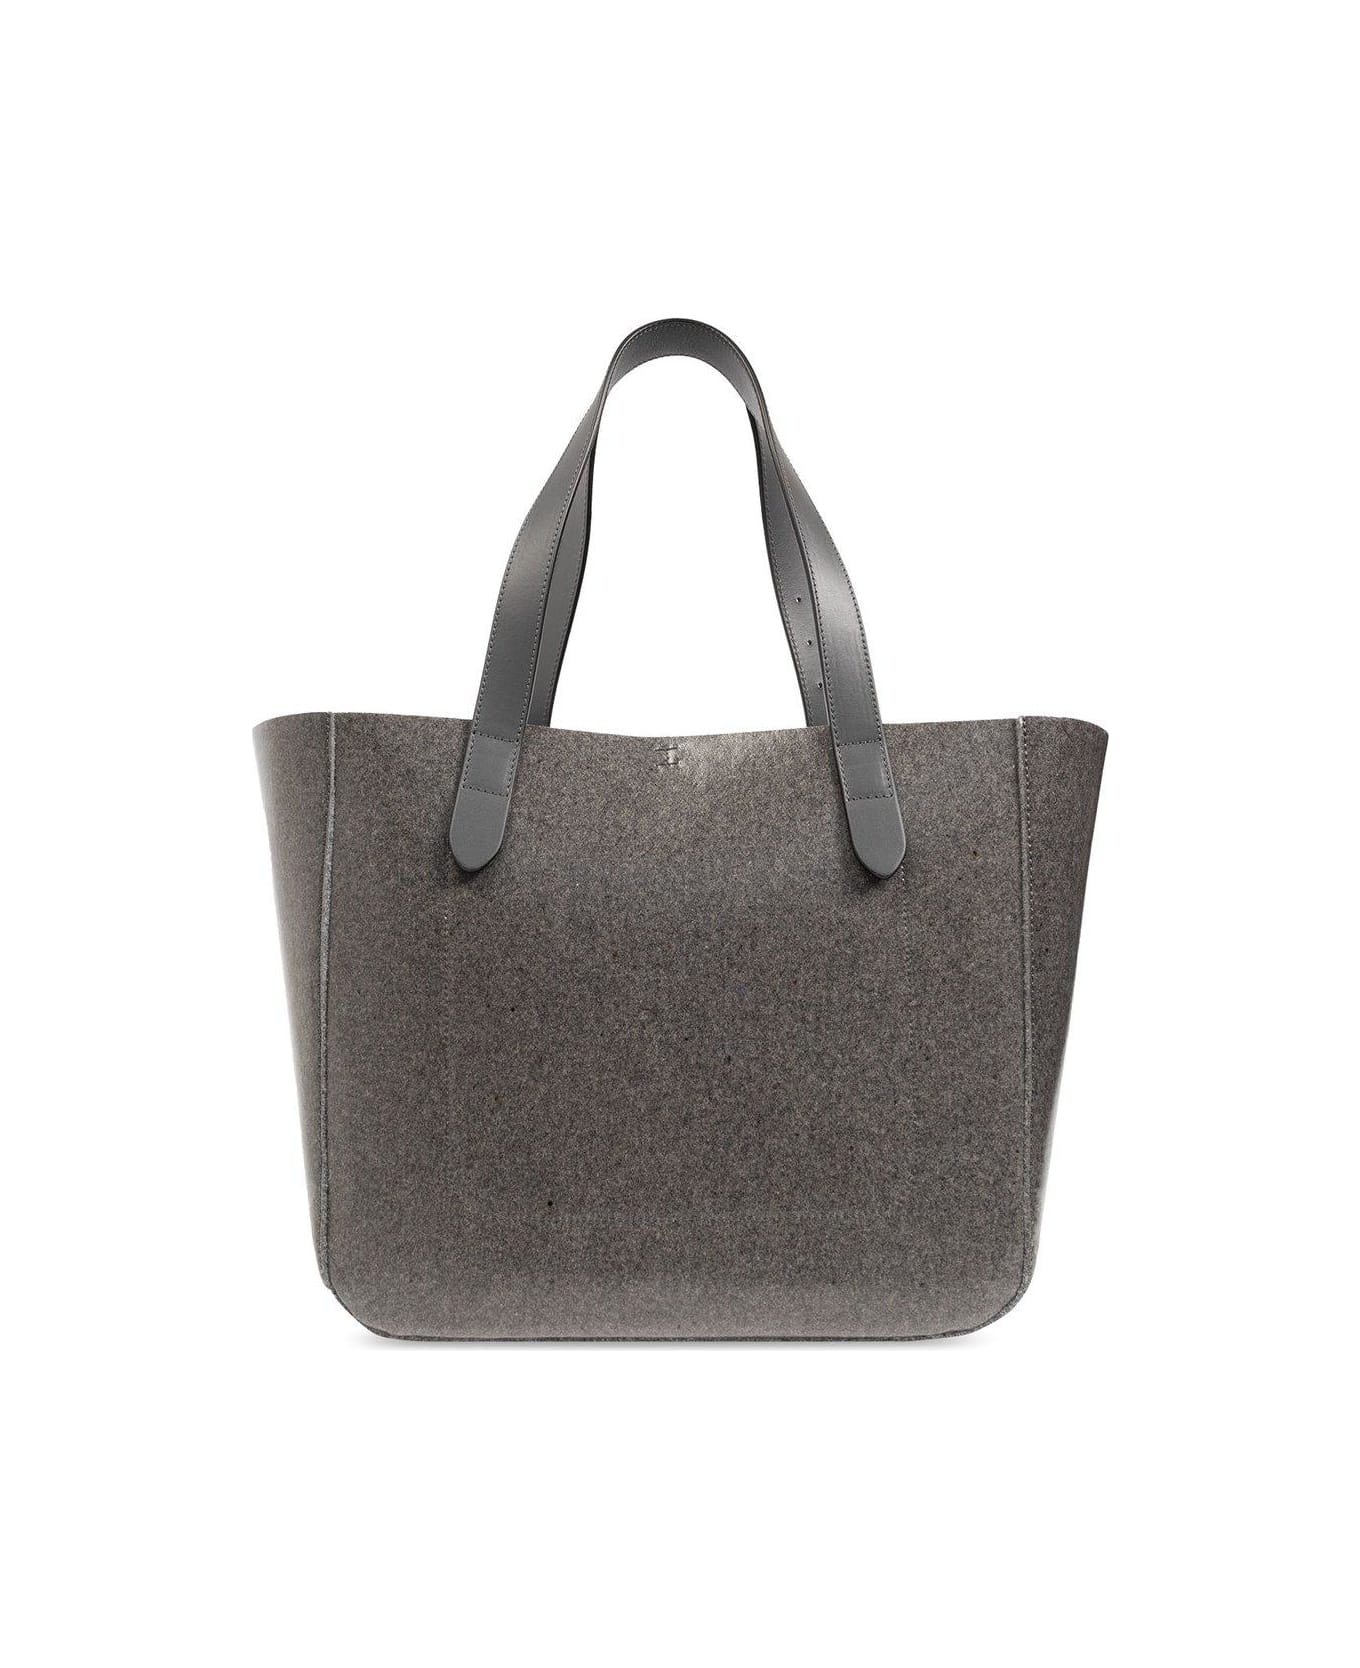 J.W. Anderson Belt Anchor Patch Tote Bag - GREY